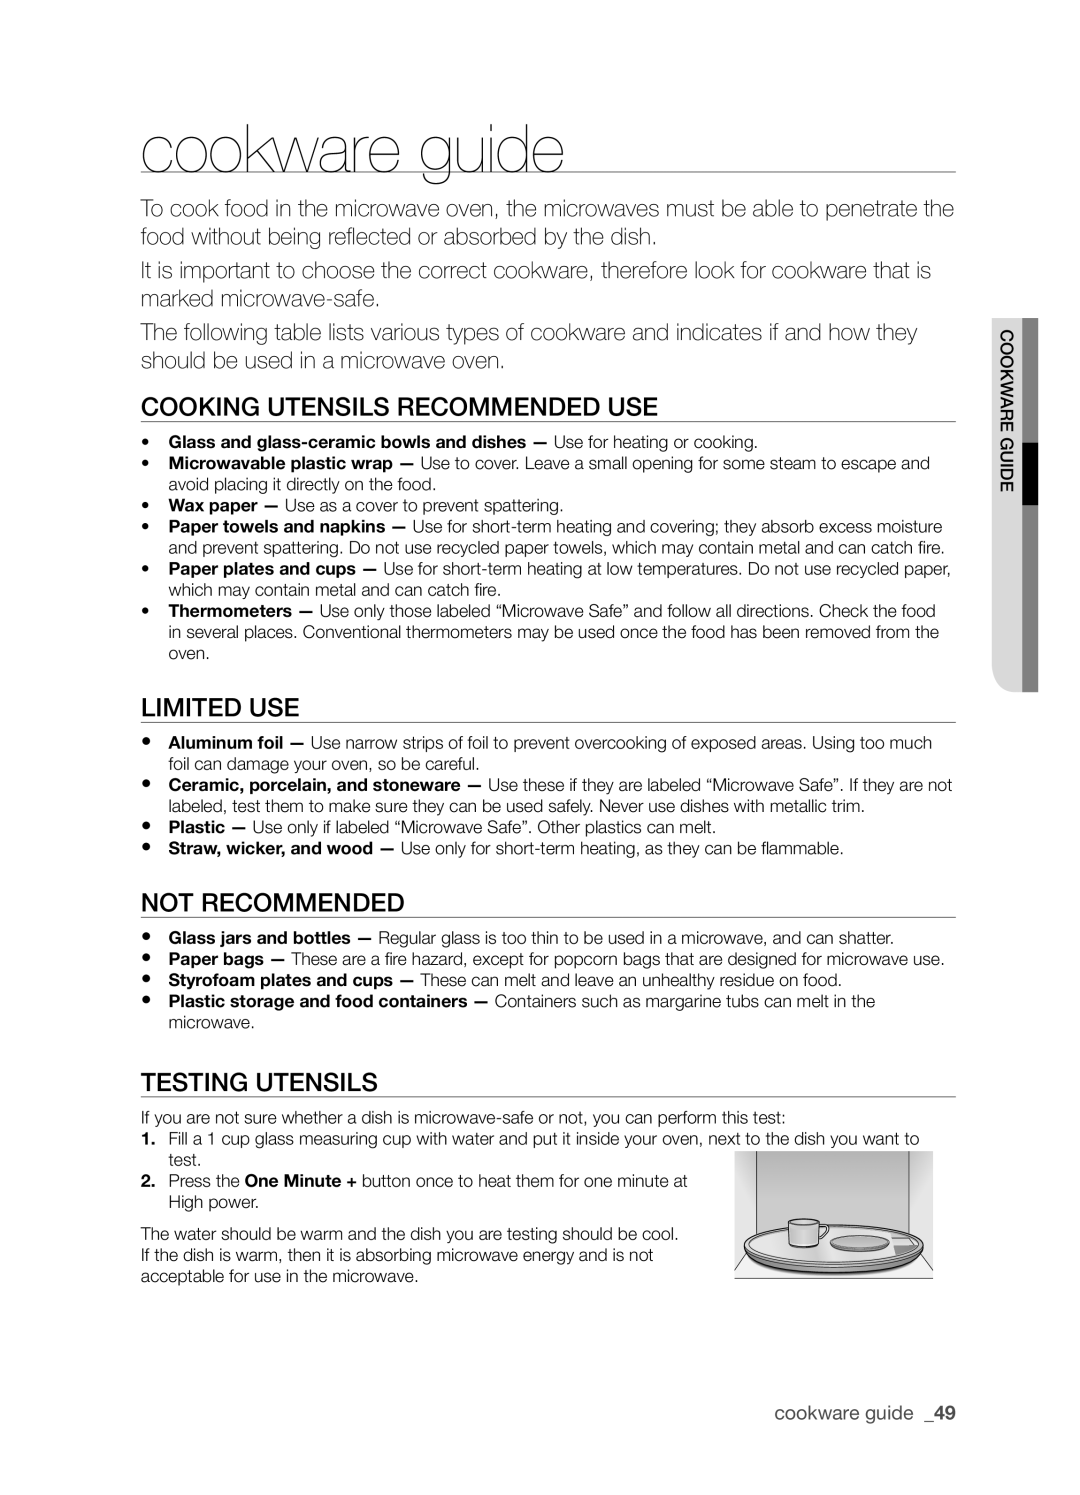 Samsung SMK9175 cookware guide, Cooking utensils recommended use, Limited use, Not recommended, Testing utensils 